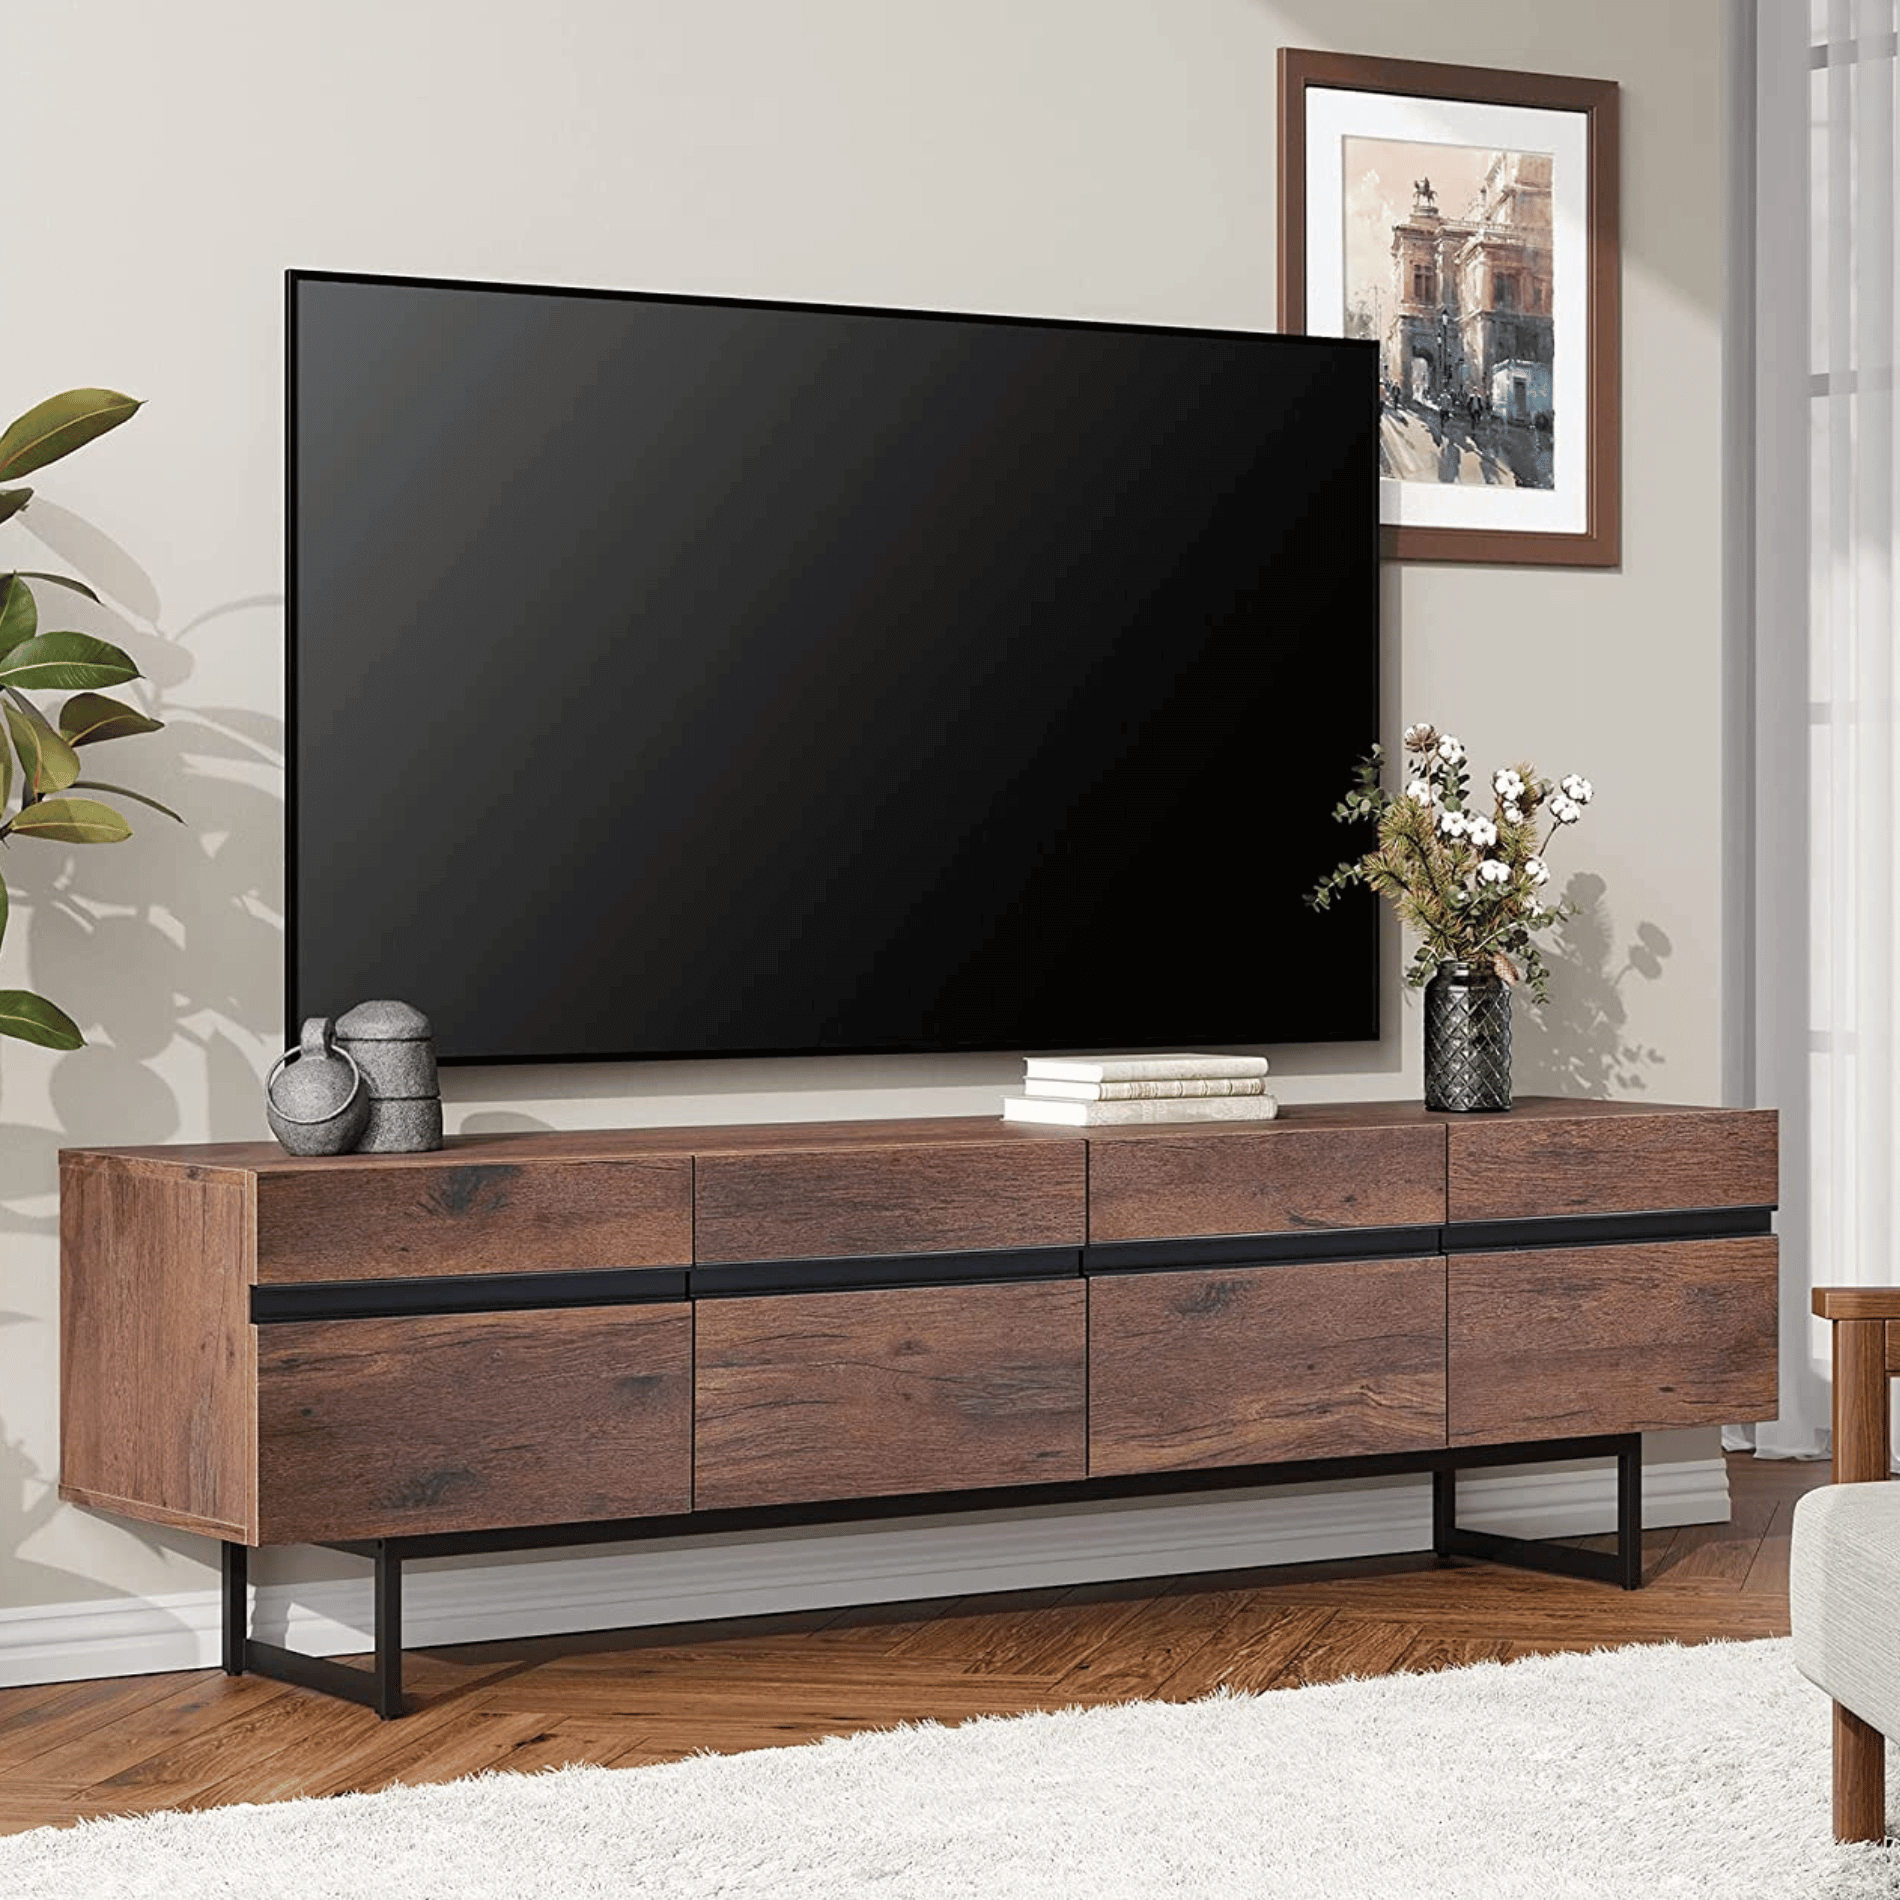 WAMPAT Modern TV Stand for up to 100 inch 2 in 1 Entertainment Center TV Console with Storage Cabinets Media Console for Living Room